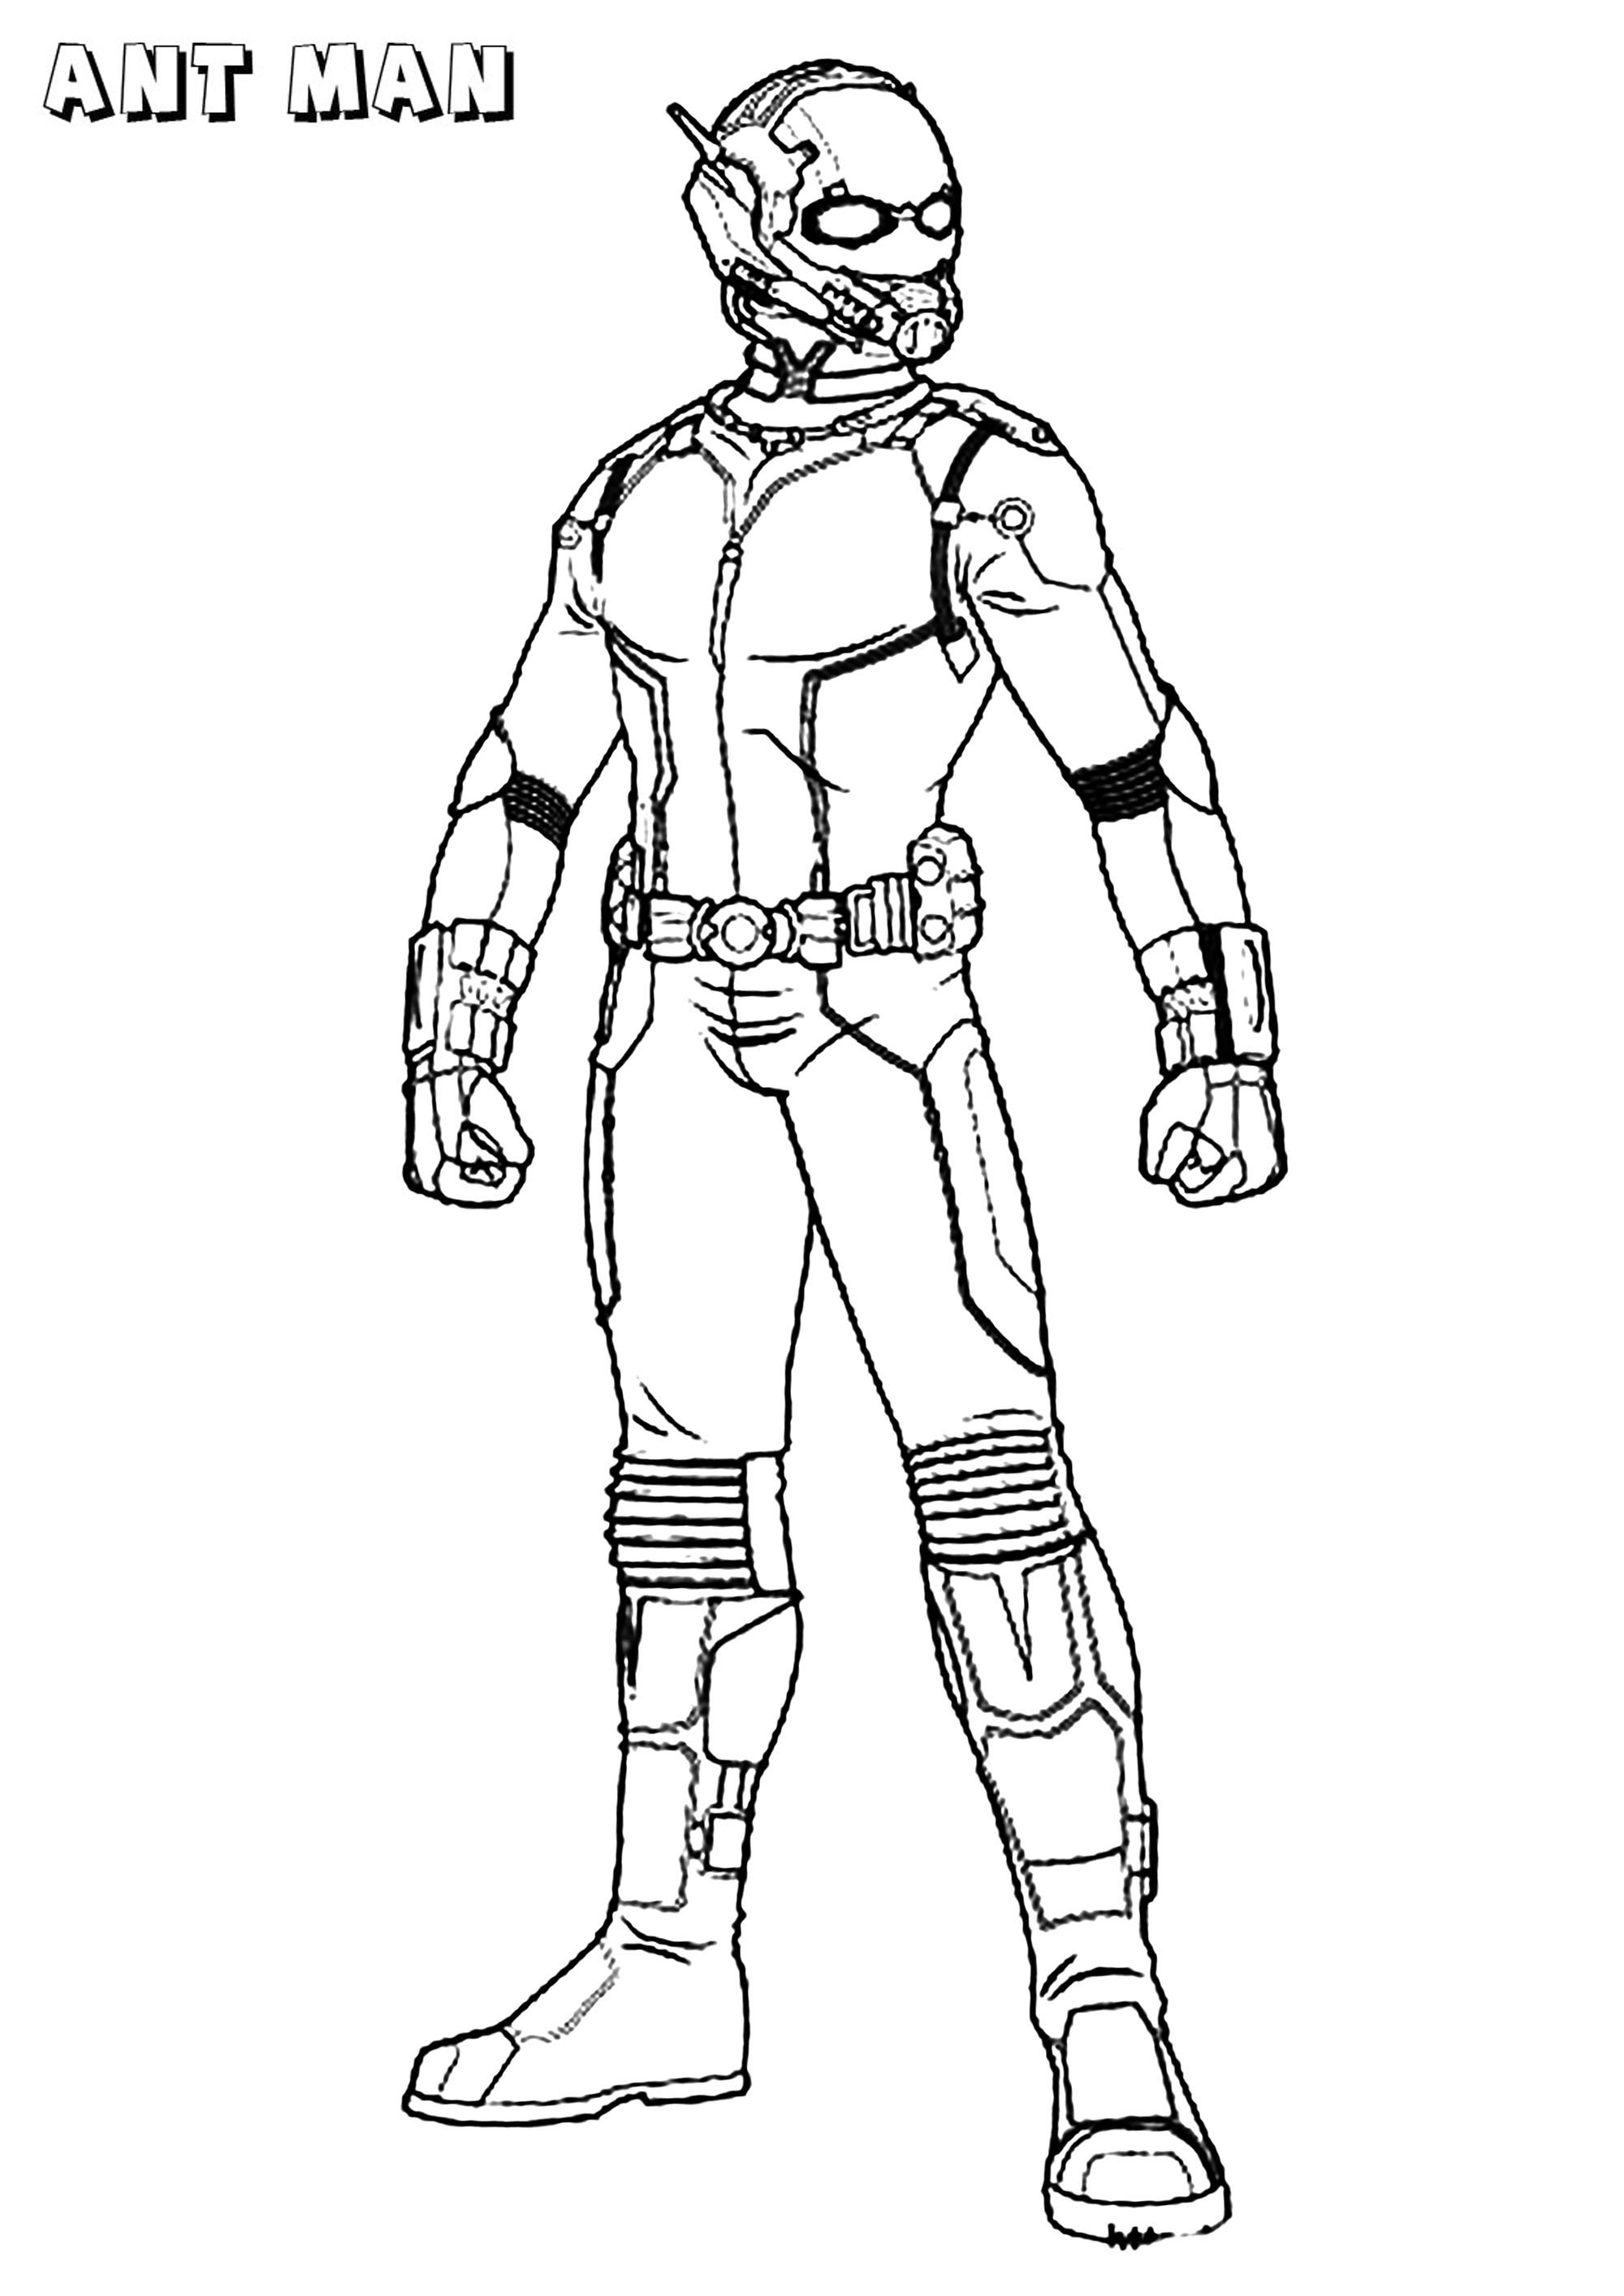 Hank Pym Ant-Man Avengers Drawing Marvel Cinematic Universe PNG, Clipart,  Antman, Ant Man, Ant Man,